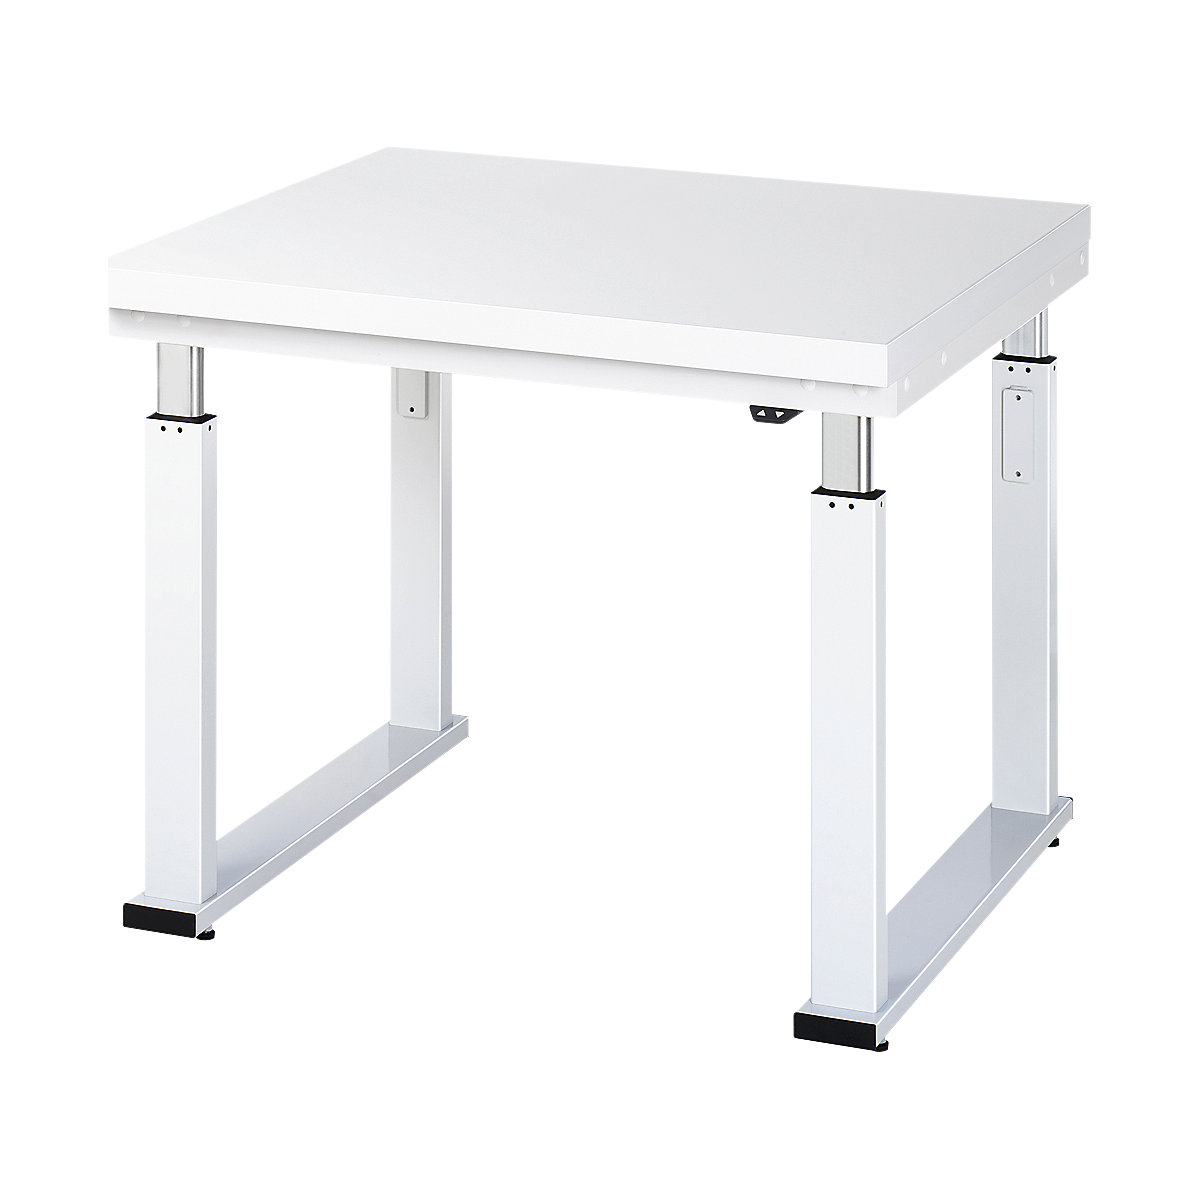 Work table, electric height adjustment – RAU, hardened laminate worktop, max. load 600 kg, WxD 1000 x 900 mm-15